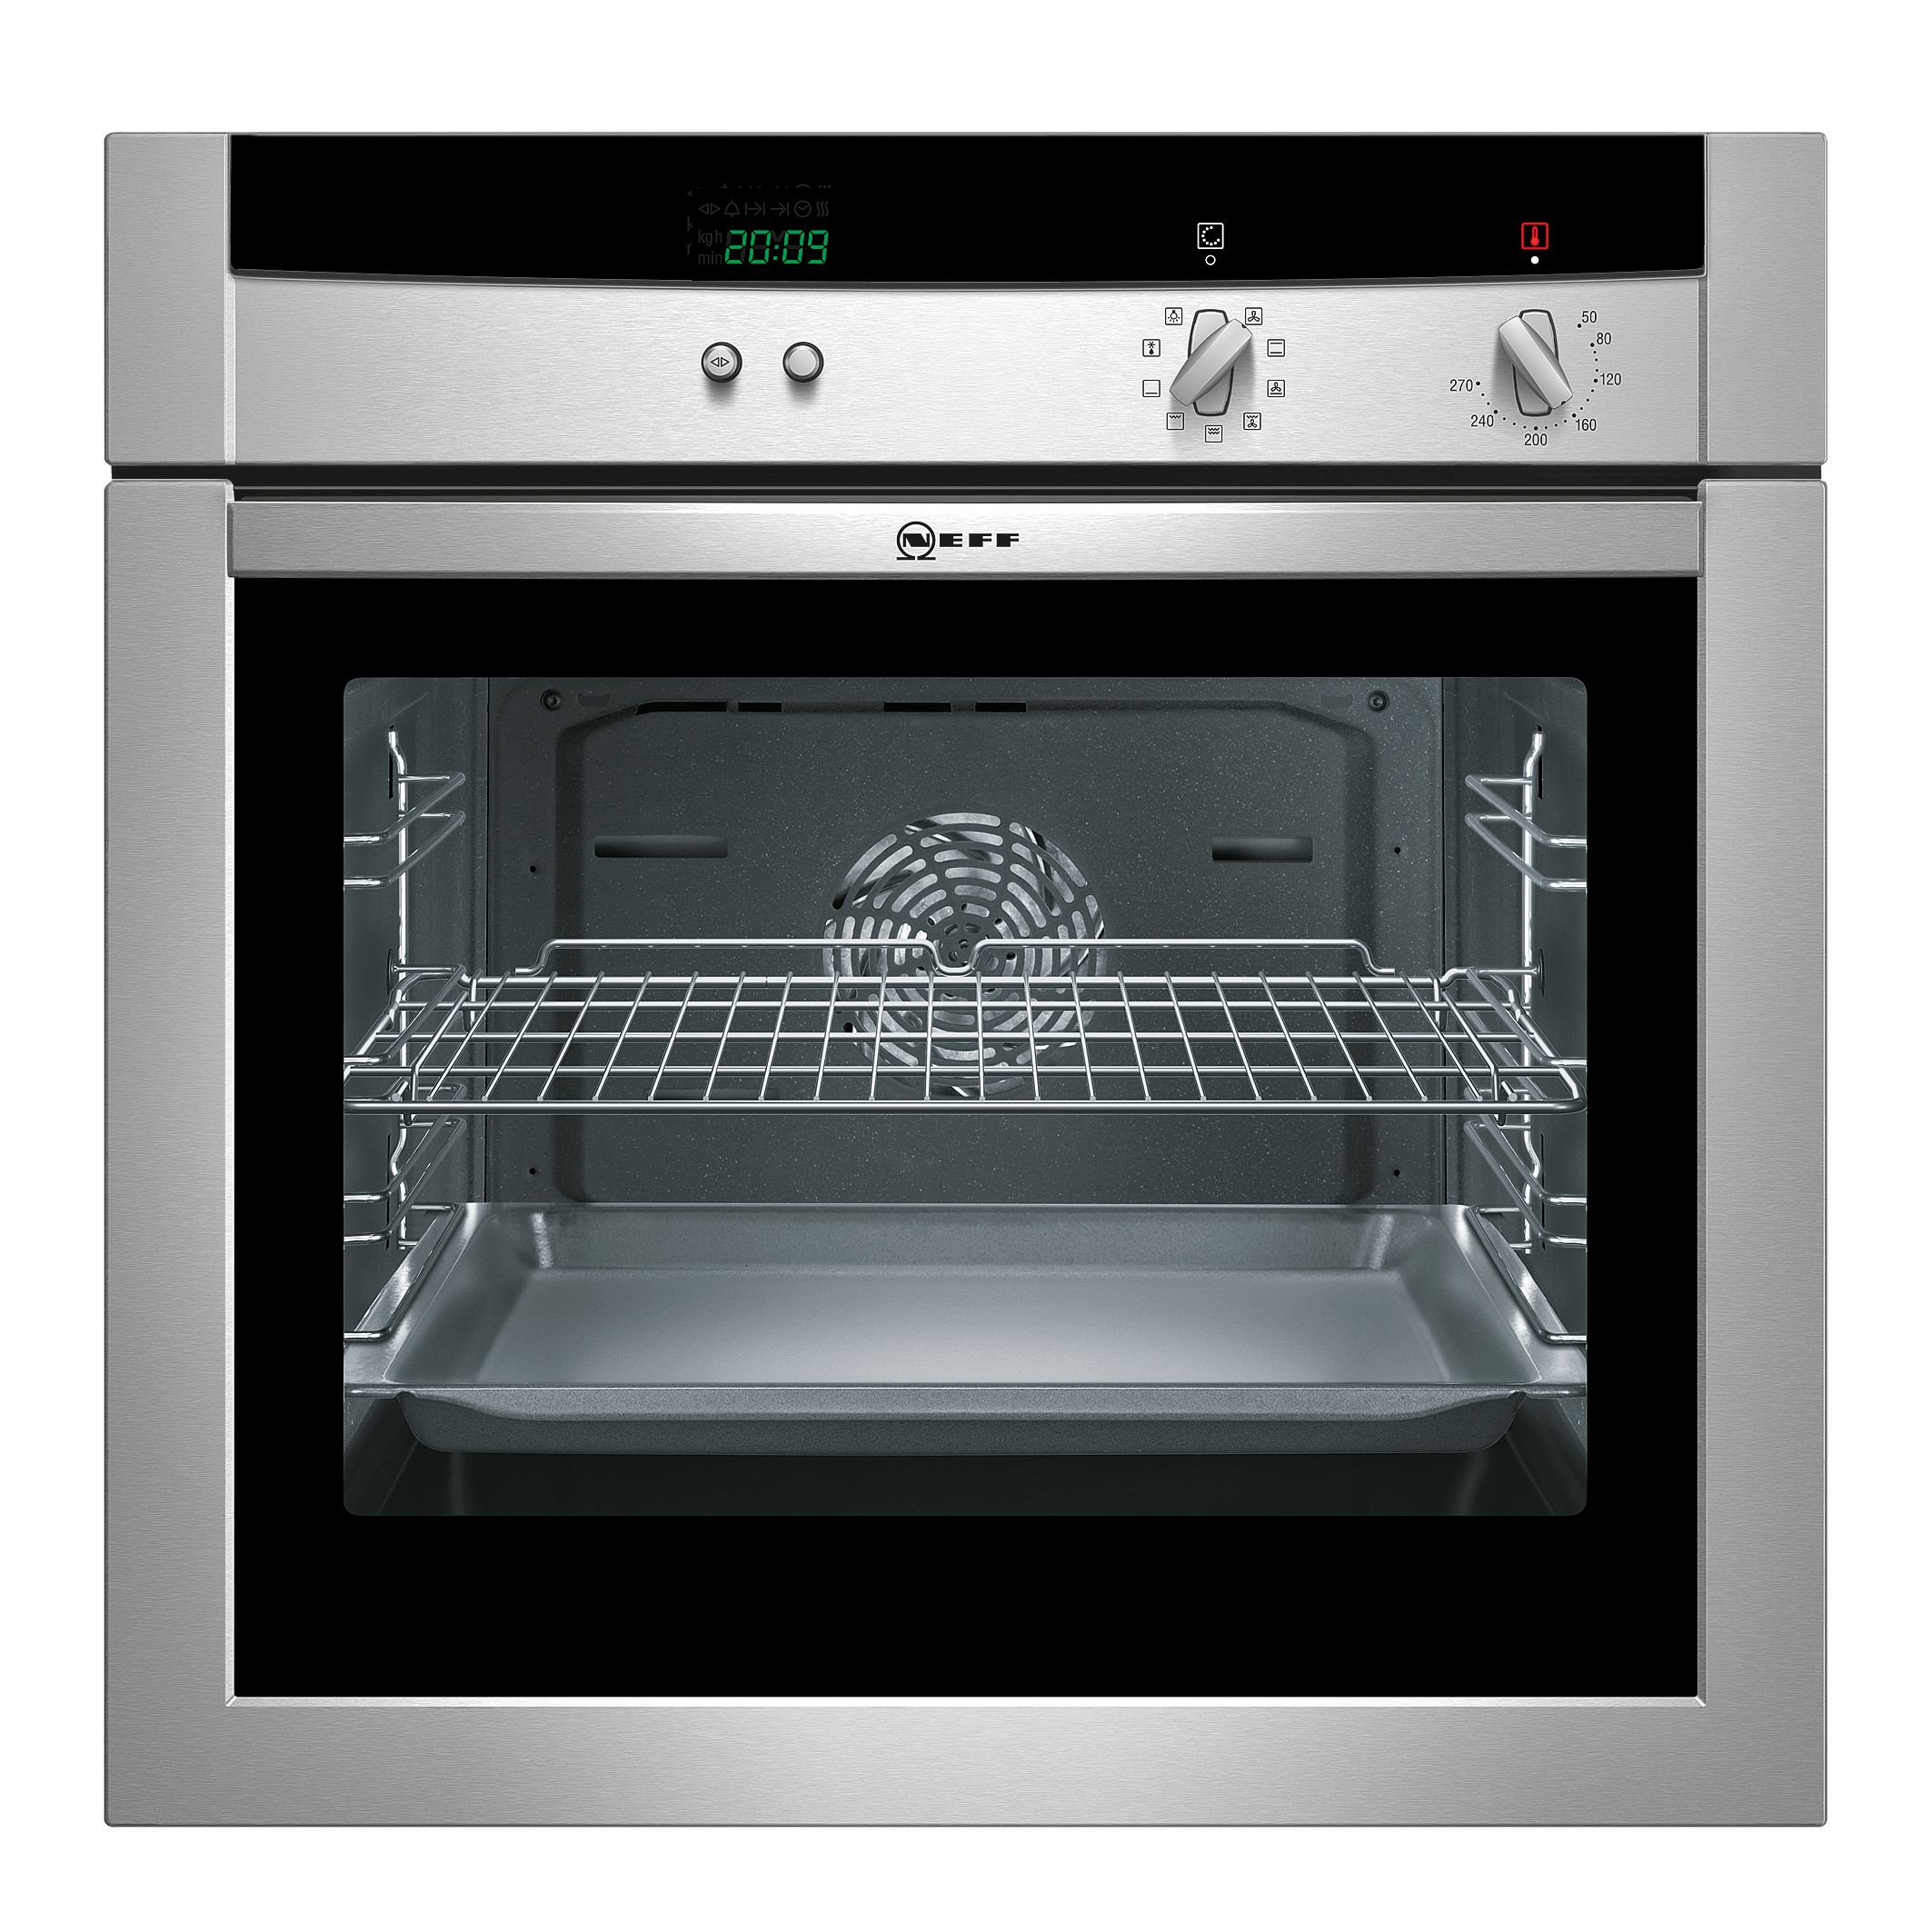 Neff B15M62N0GB Single Electric Oven, Stainless Steel at JohnLewis